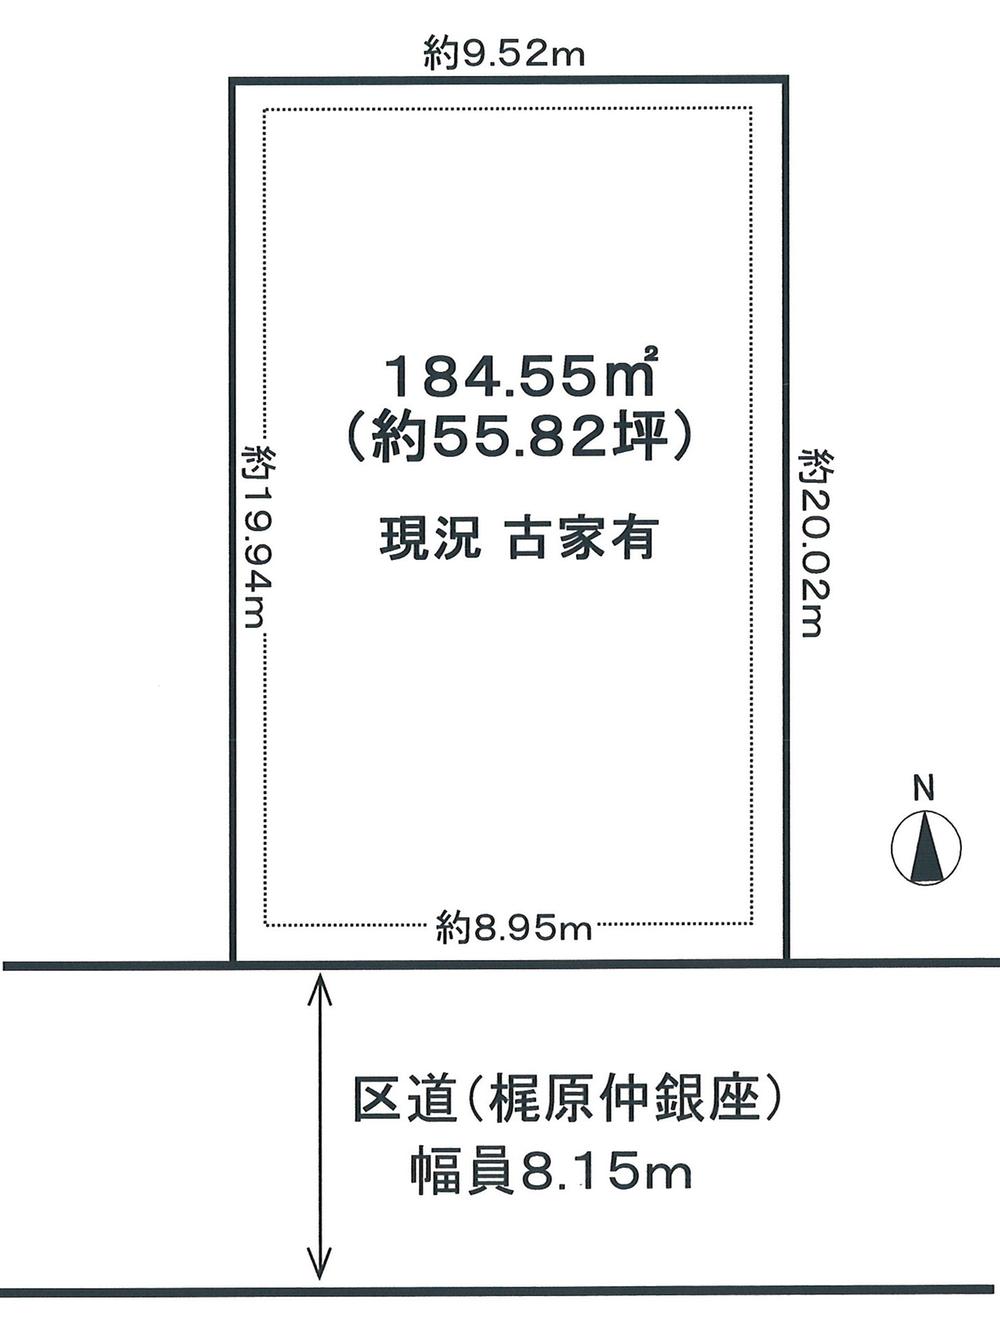 Compartment figure. Land price 74,800,000 yen, Land area 184.55 sq m south road ・ Bright-shaping areas of public road surface